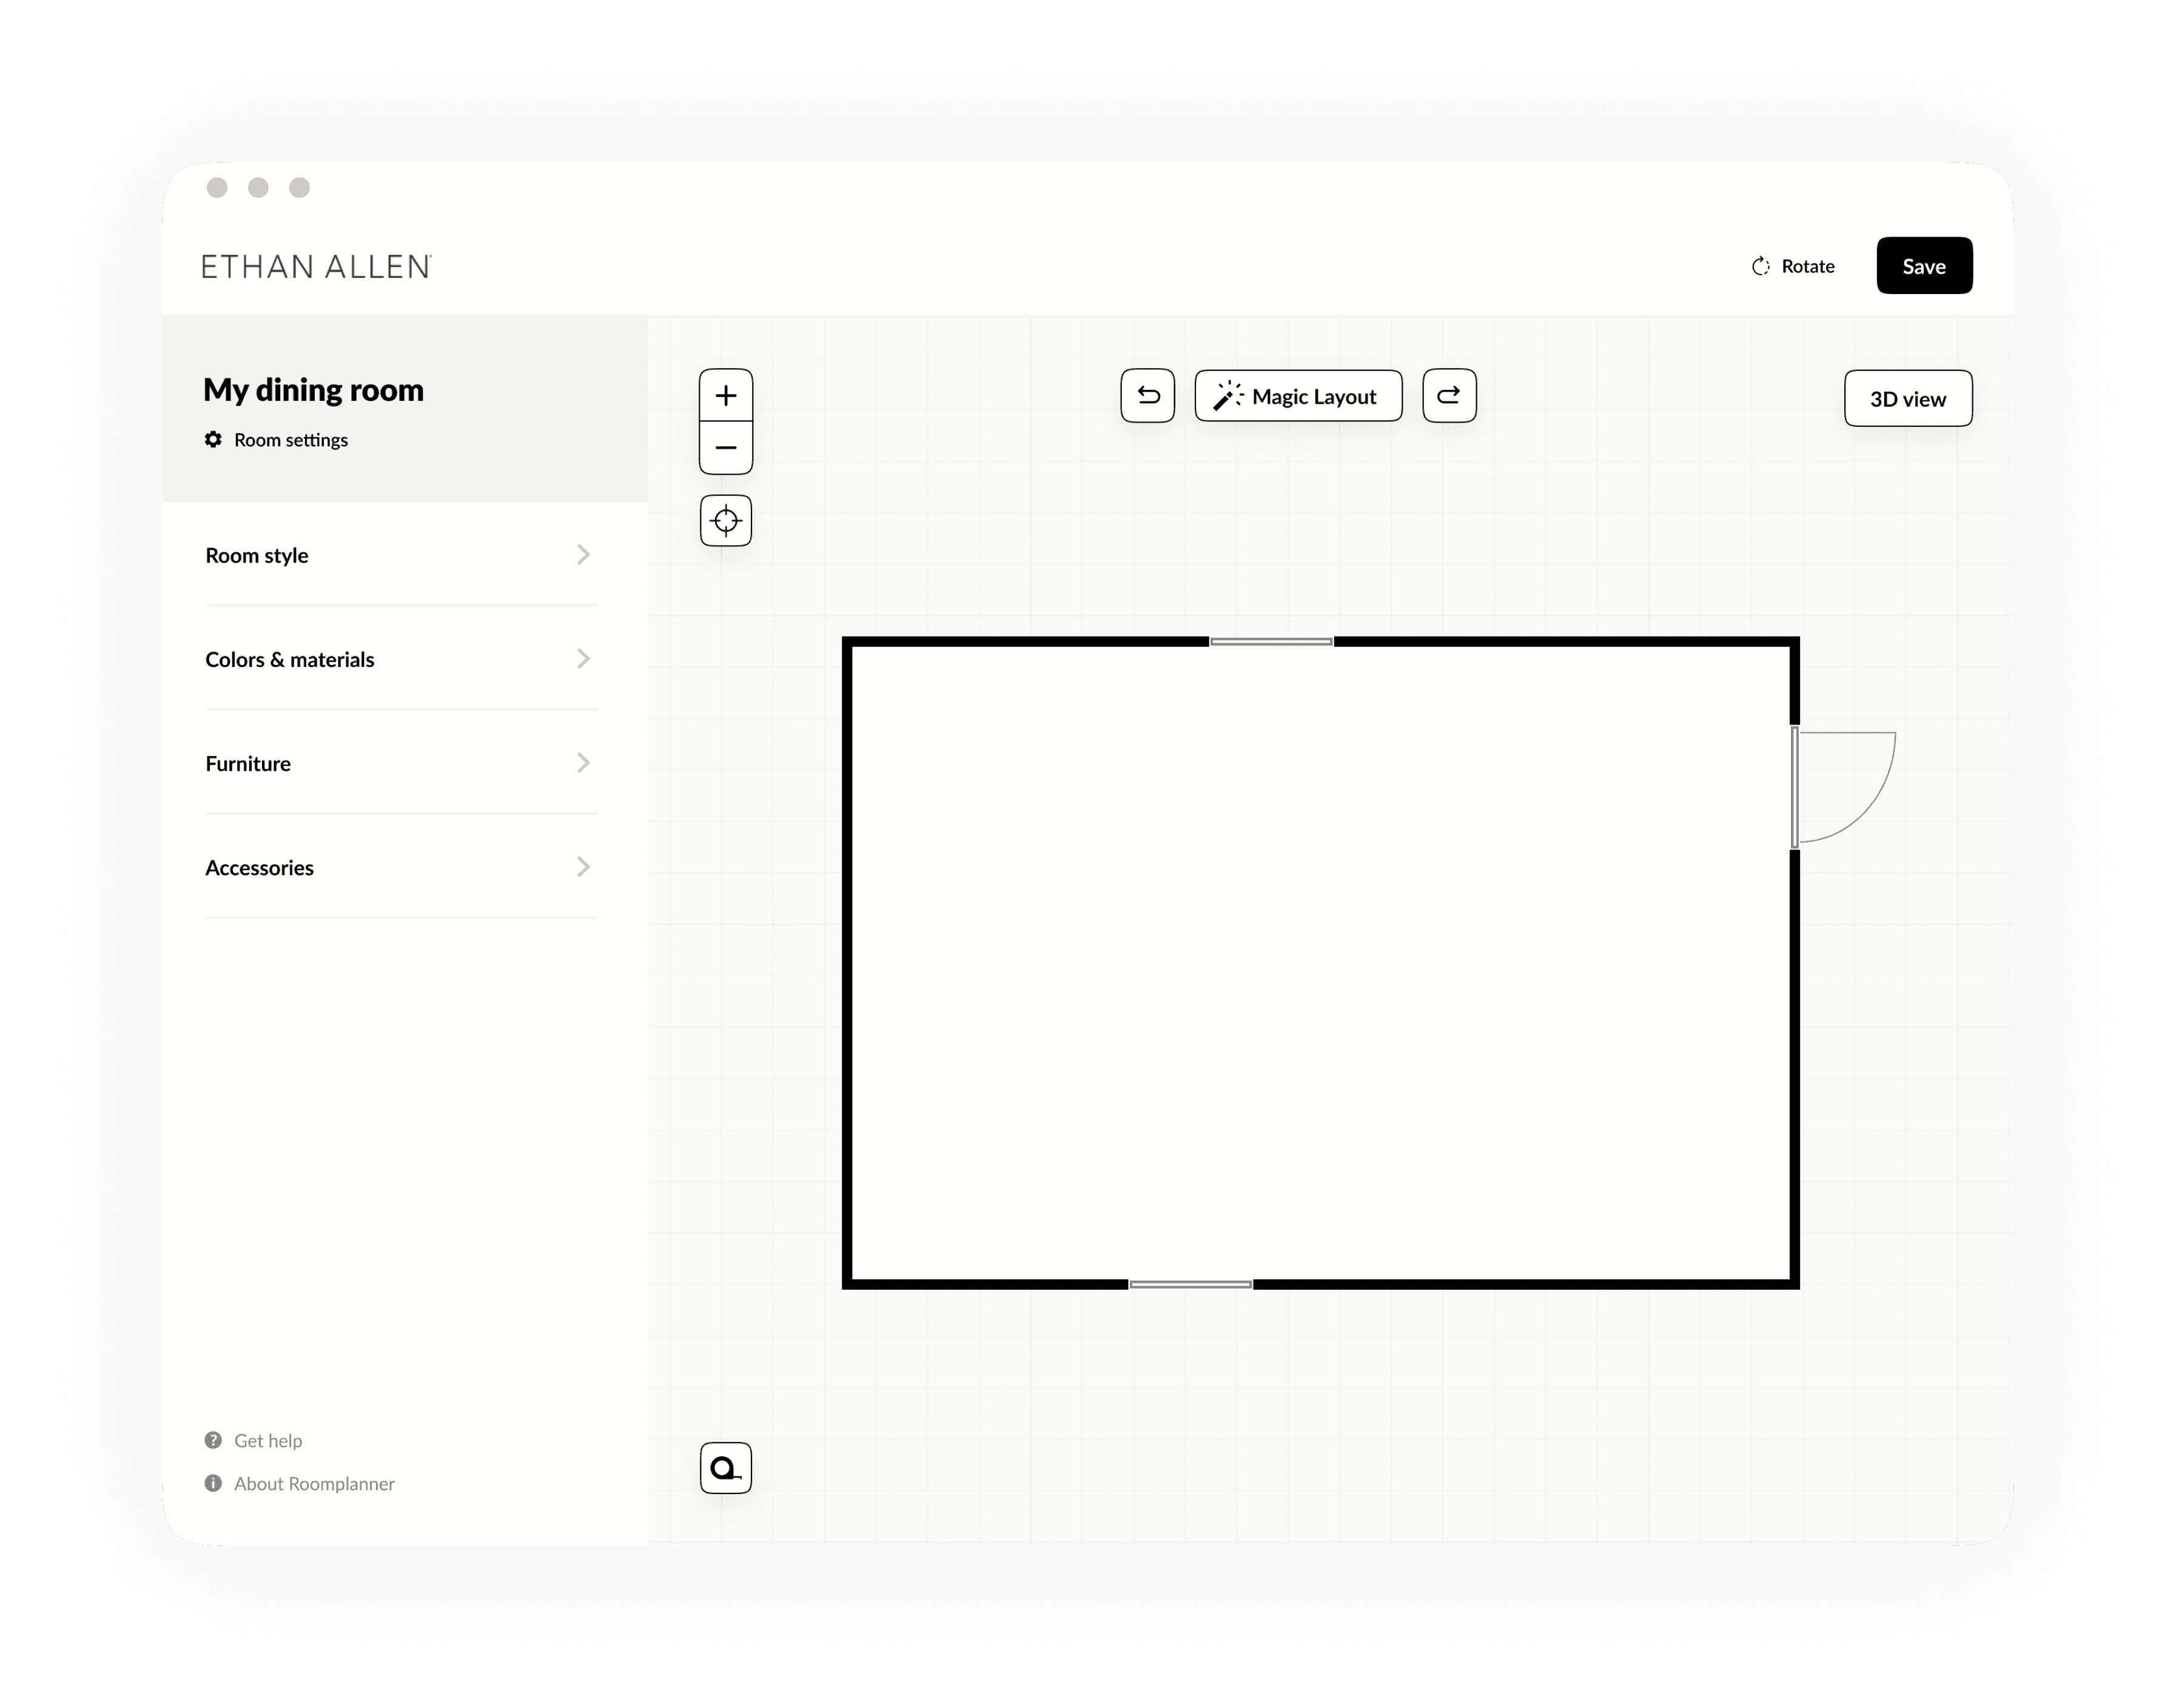 New home screen in which the room shape can be edited behind the 'Room settings' option.